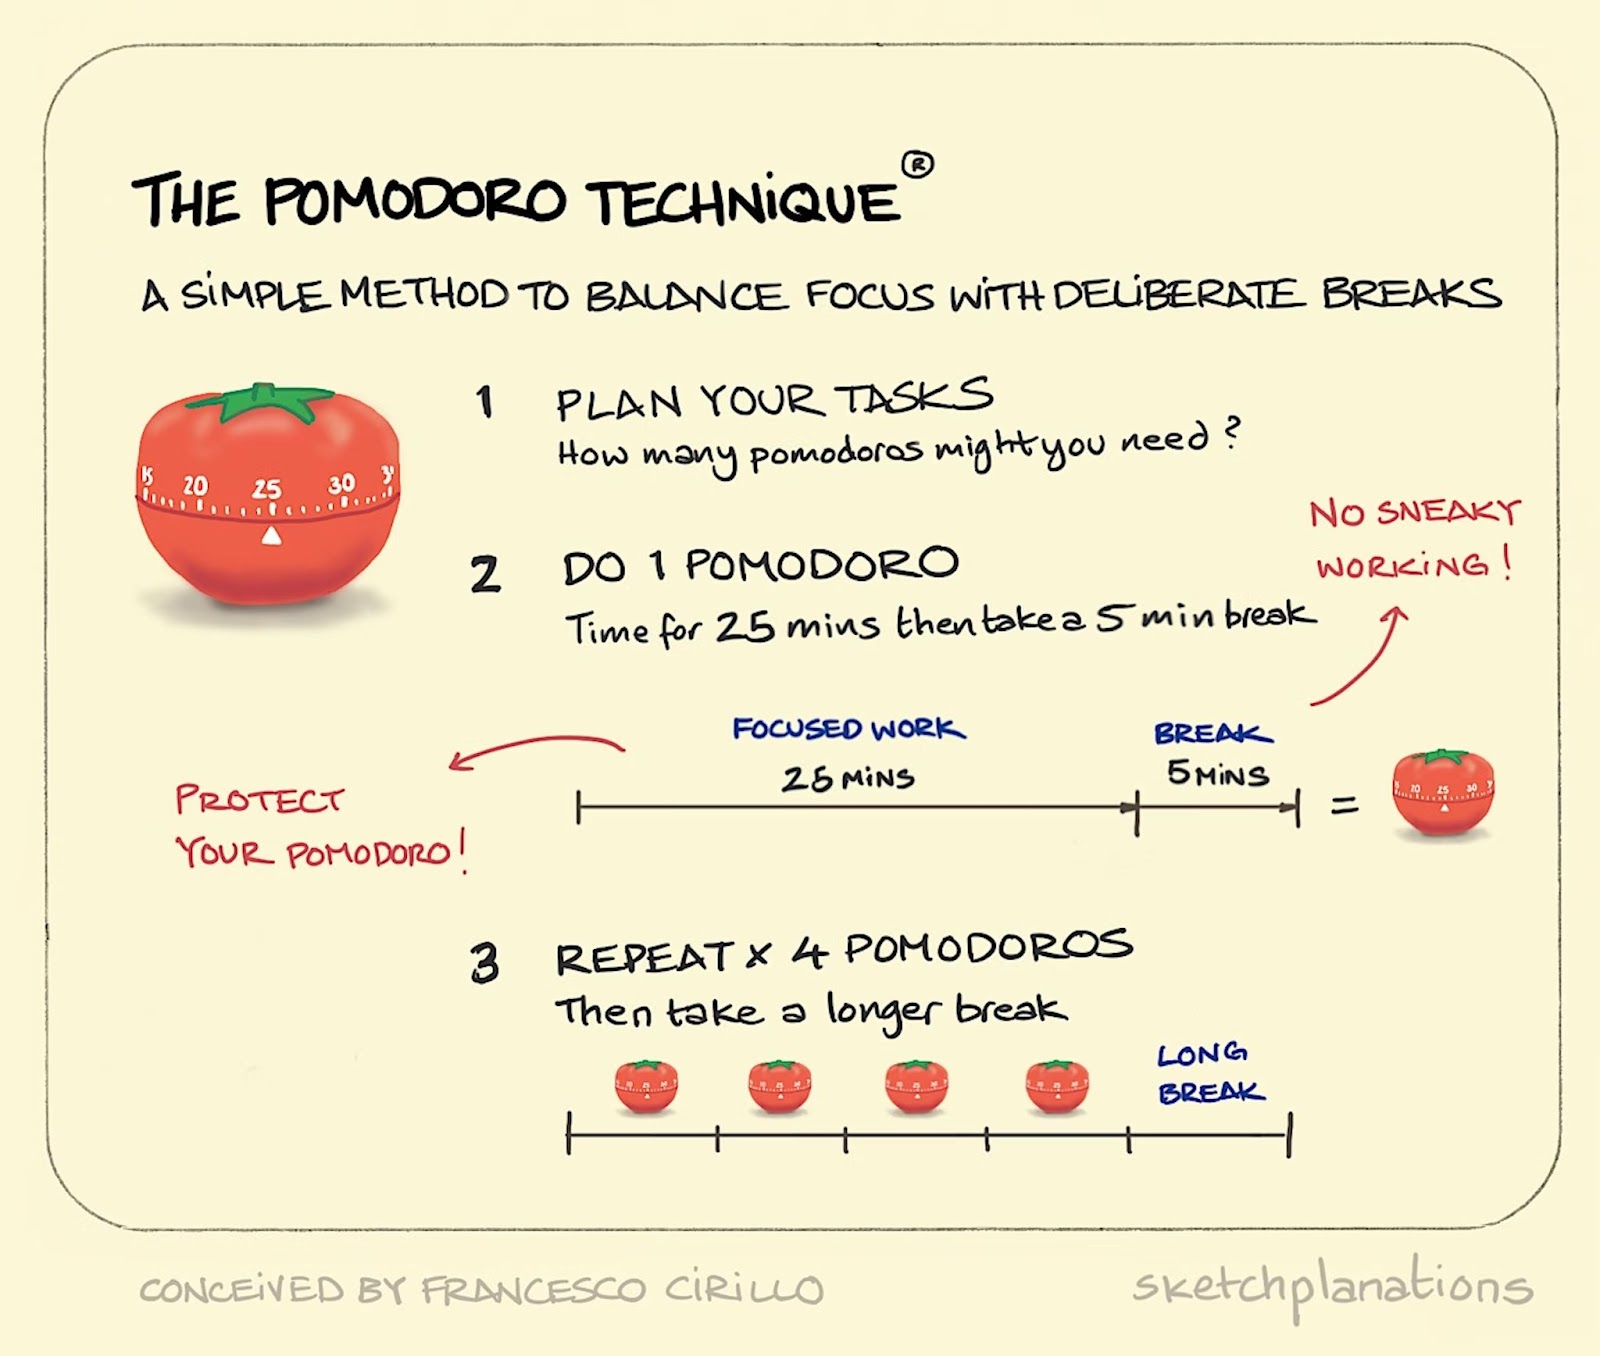 Sketch style image showing how the promodoro technique works 